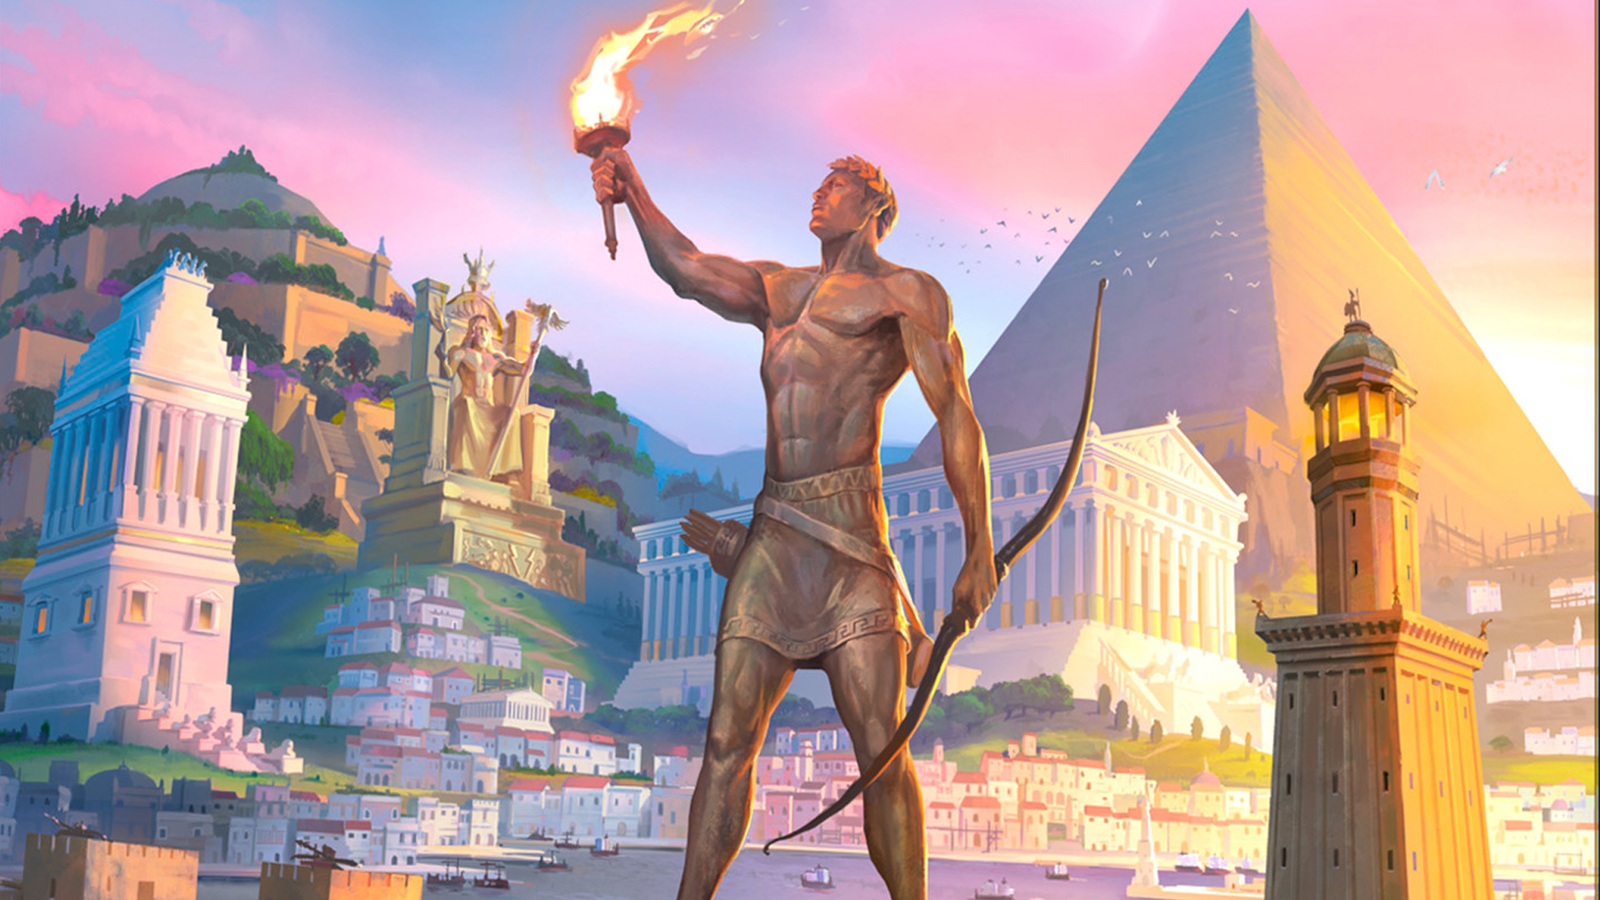 How to play 7 Wonders: board game's rules, setup and scoring explained